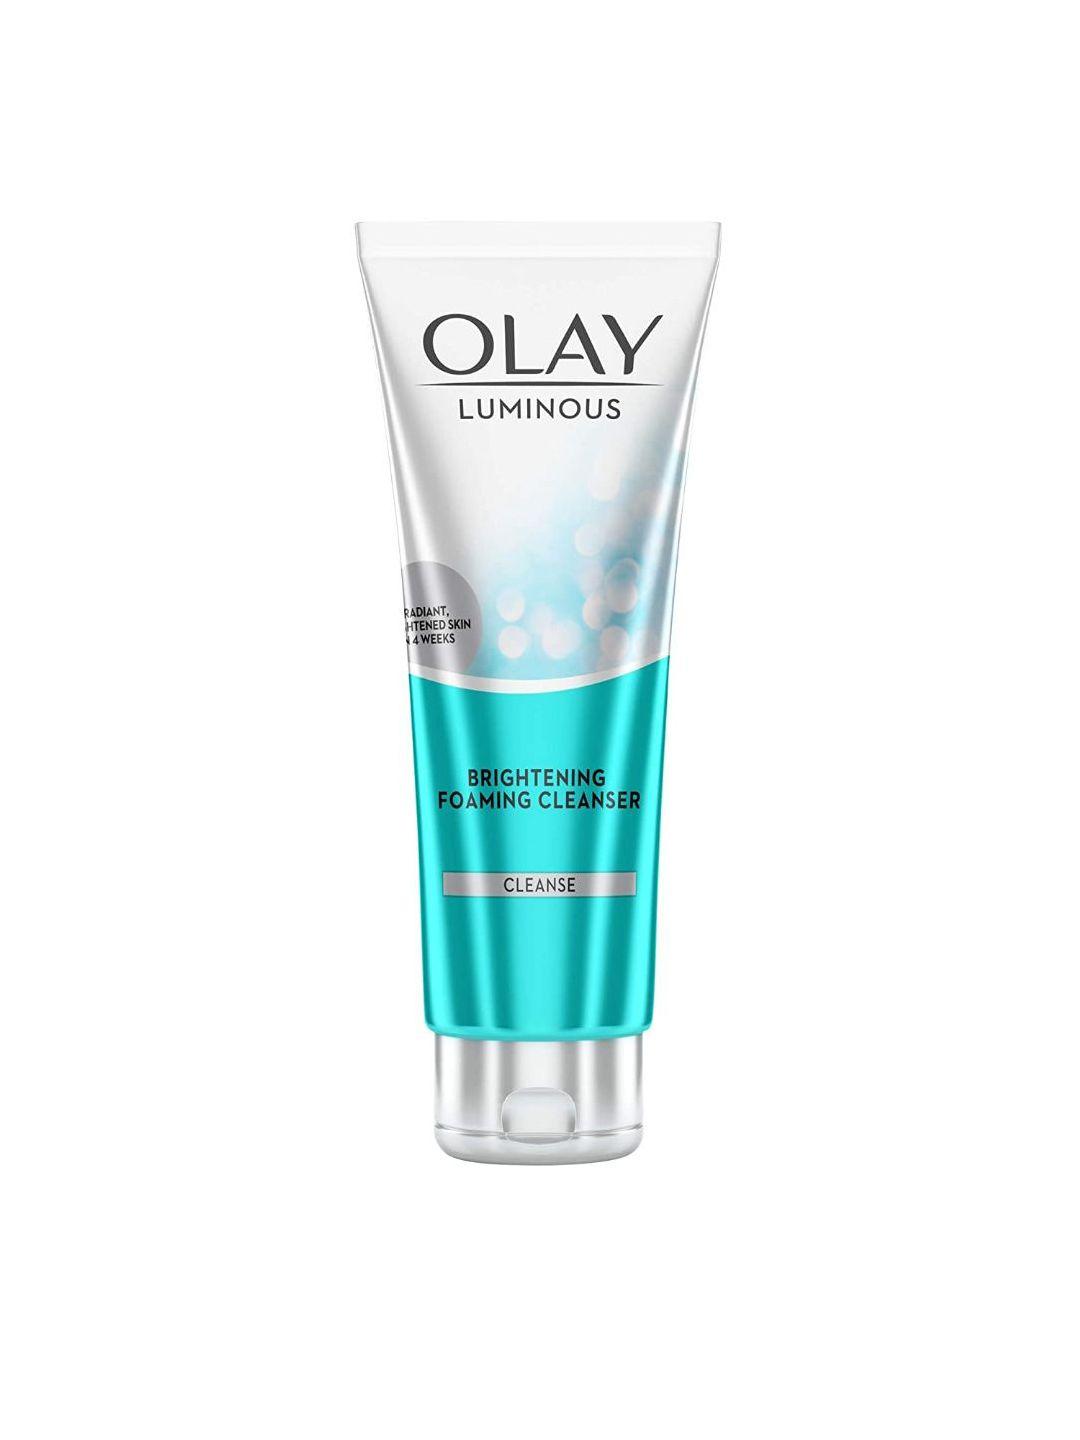 olay luminous brightening foaming cleanser & face wash with glycerin - 100g